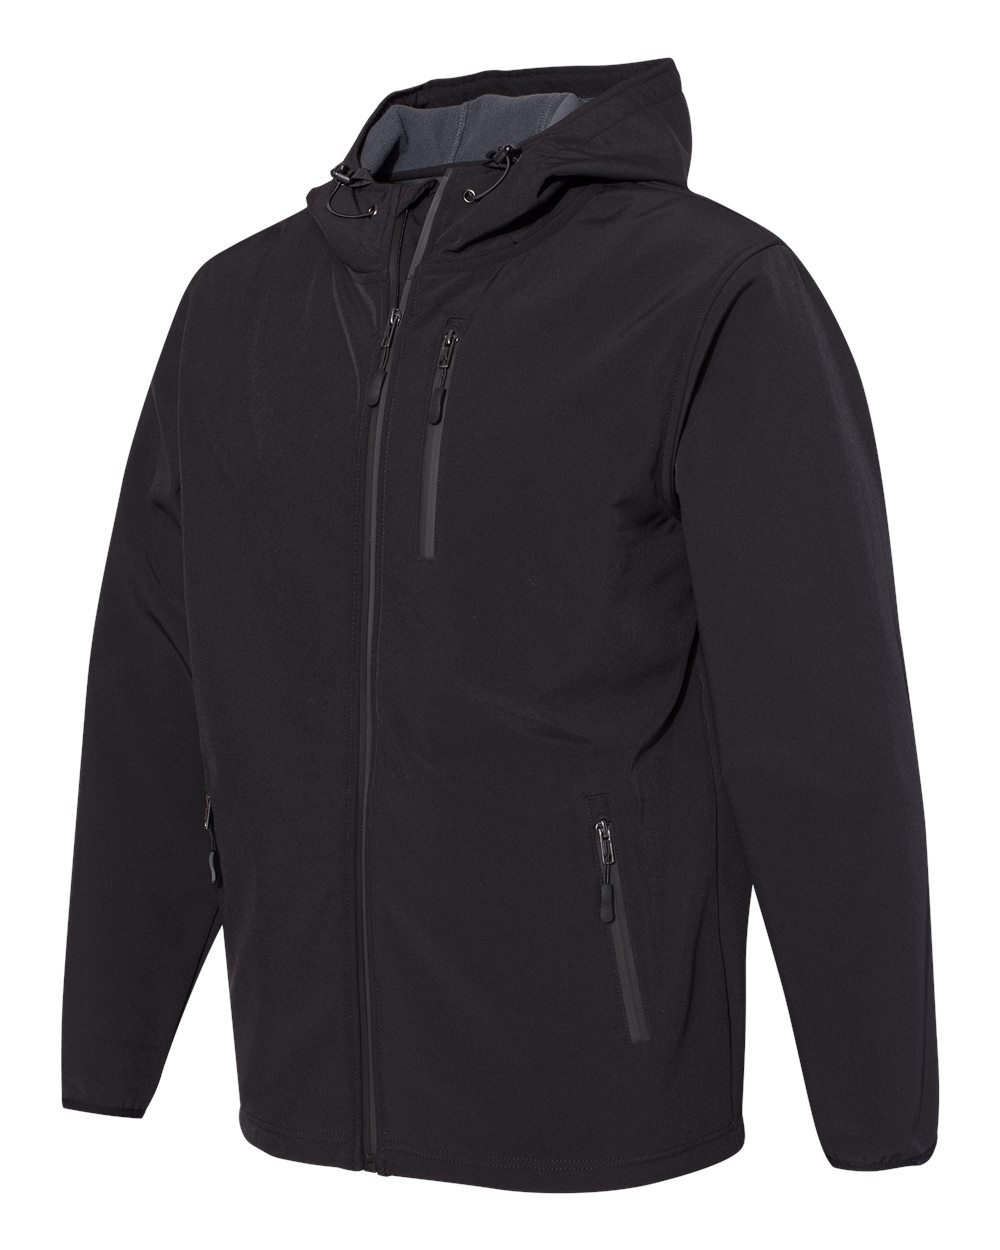 'Independent Trading Co. EXP35SSZ Poly-Tech Soft Shell Jacket'